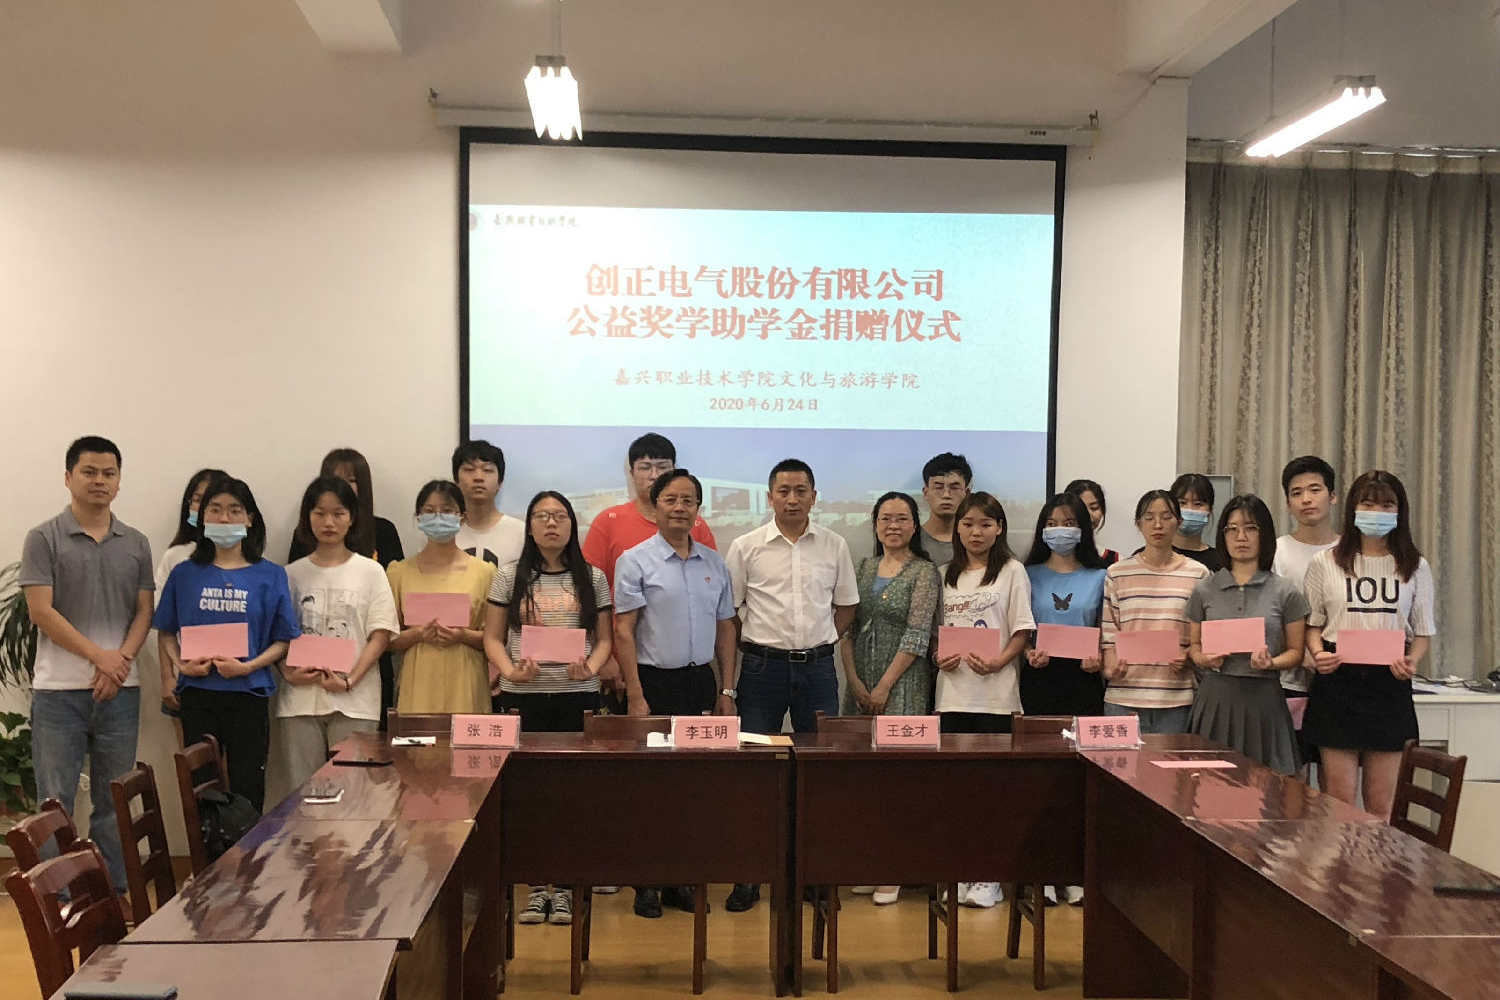 CZ Electric Co., Ltd. Public welfare scholarship donation ceremony held at Jia Vocational College